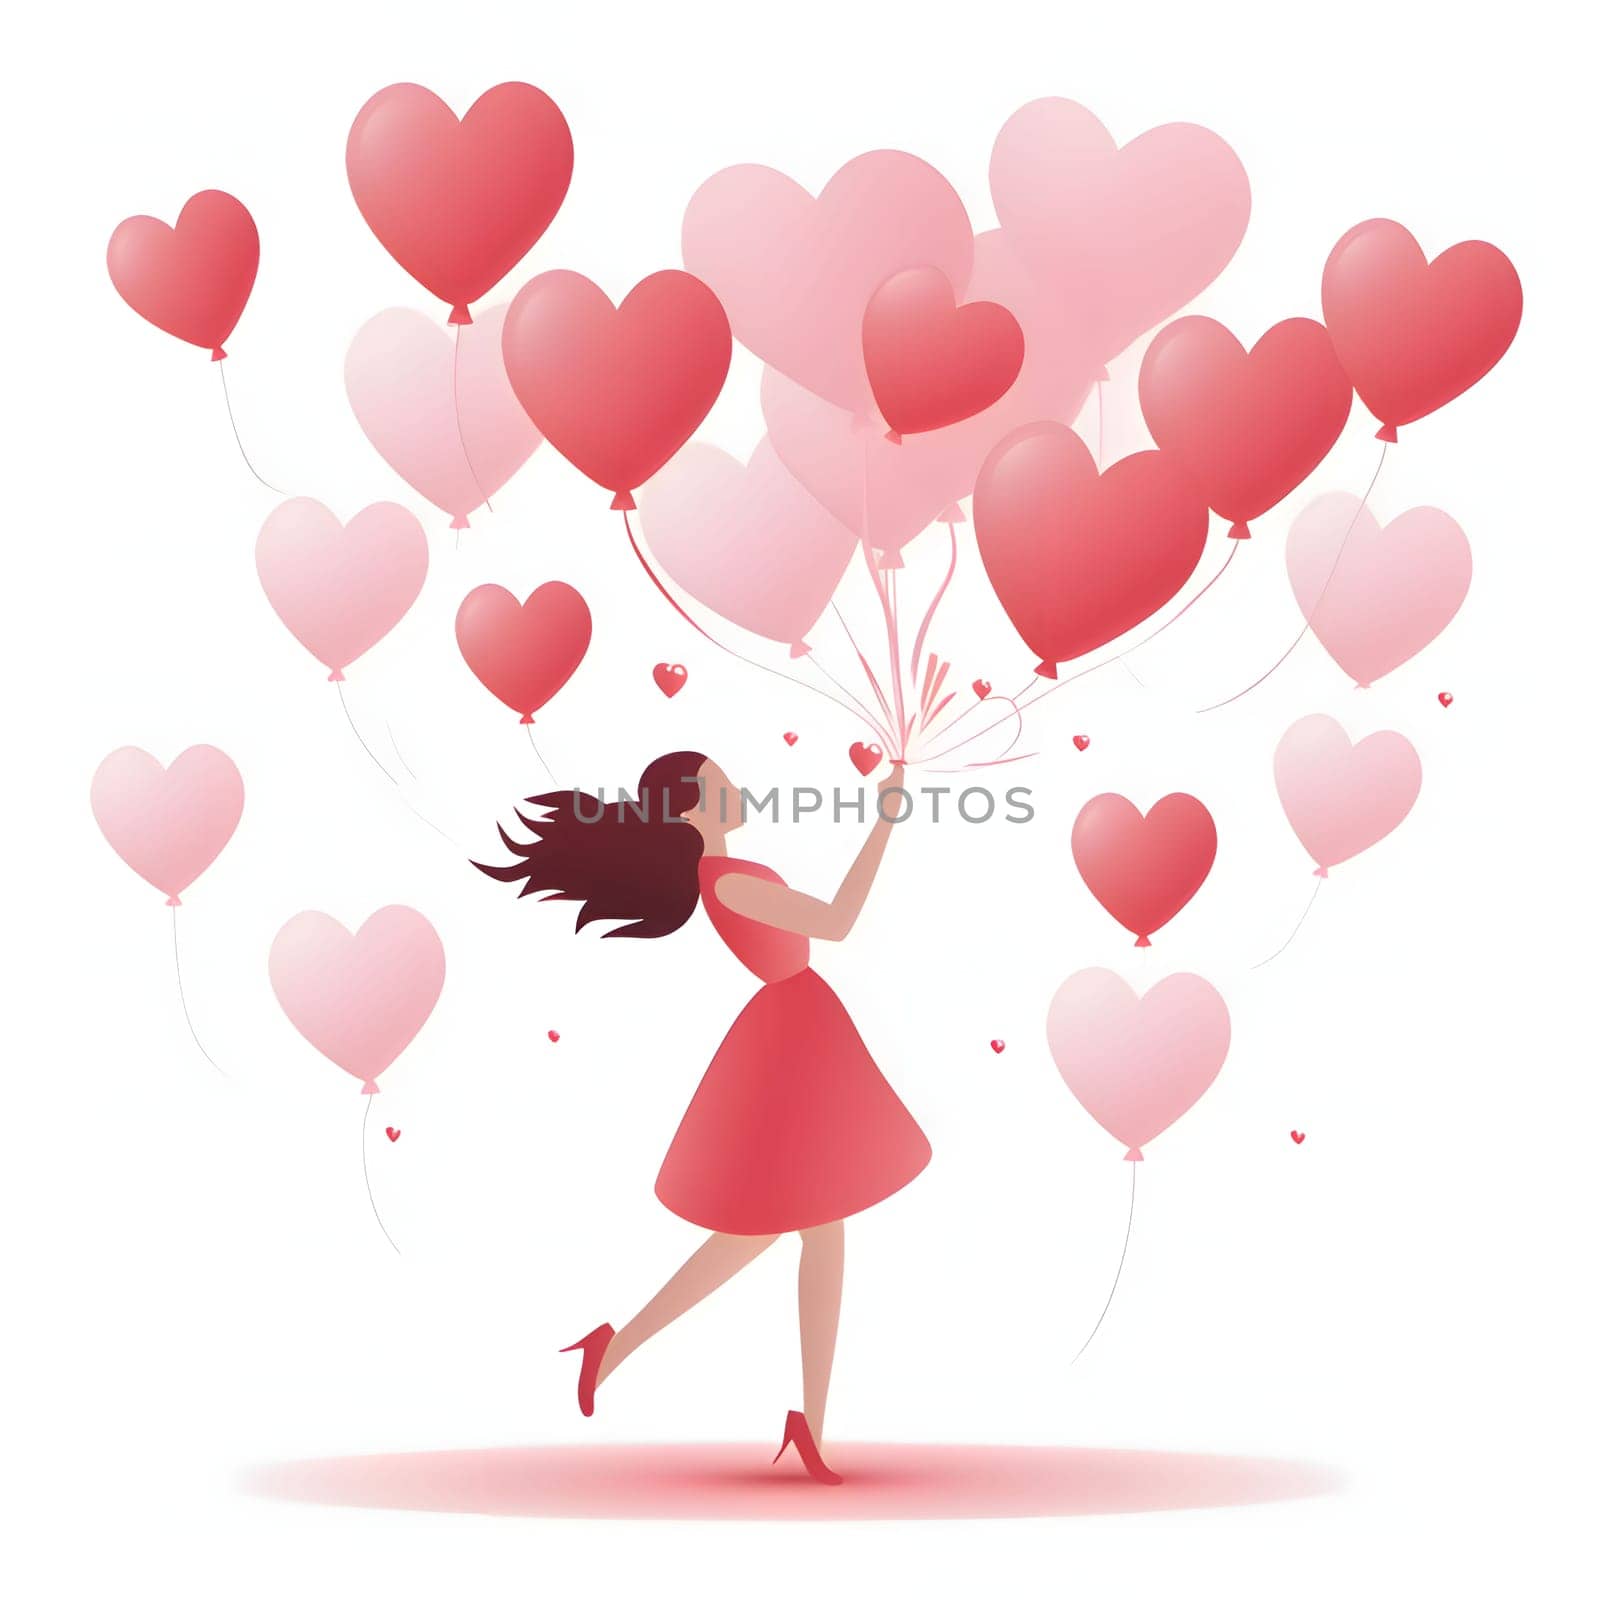 Woman holding heart-shaped balloons in her hand. Illustration on a white isolated background. Heart as a symbol of affection and love. The time of falling in love and love.